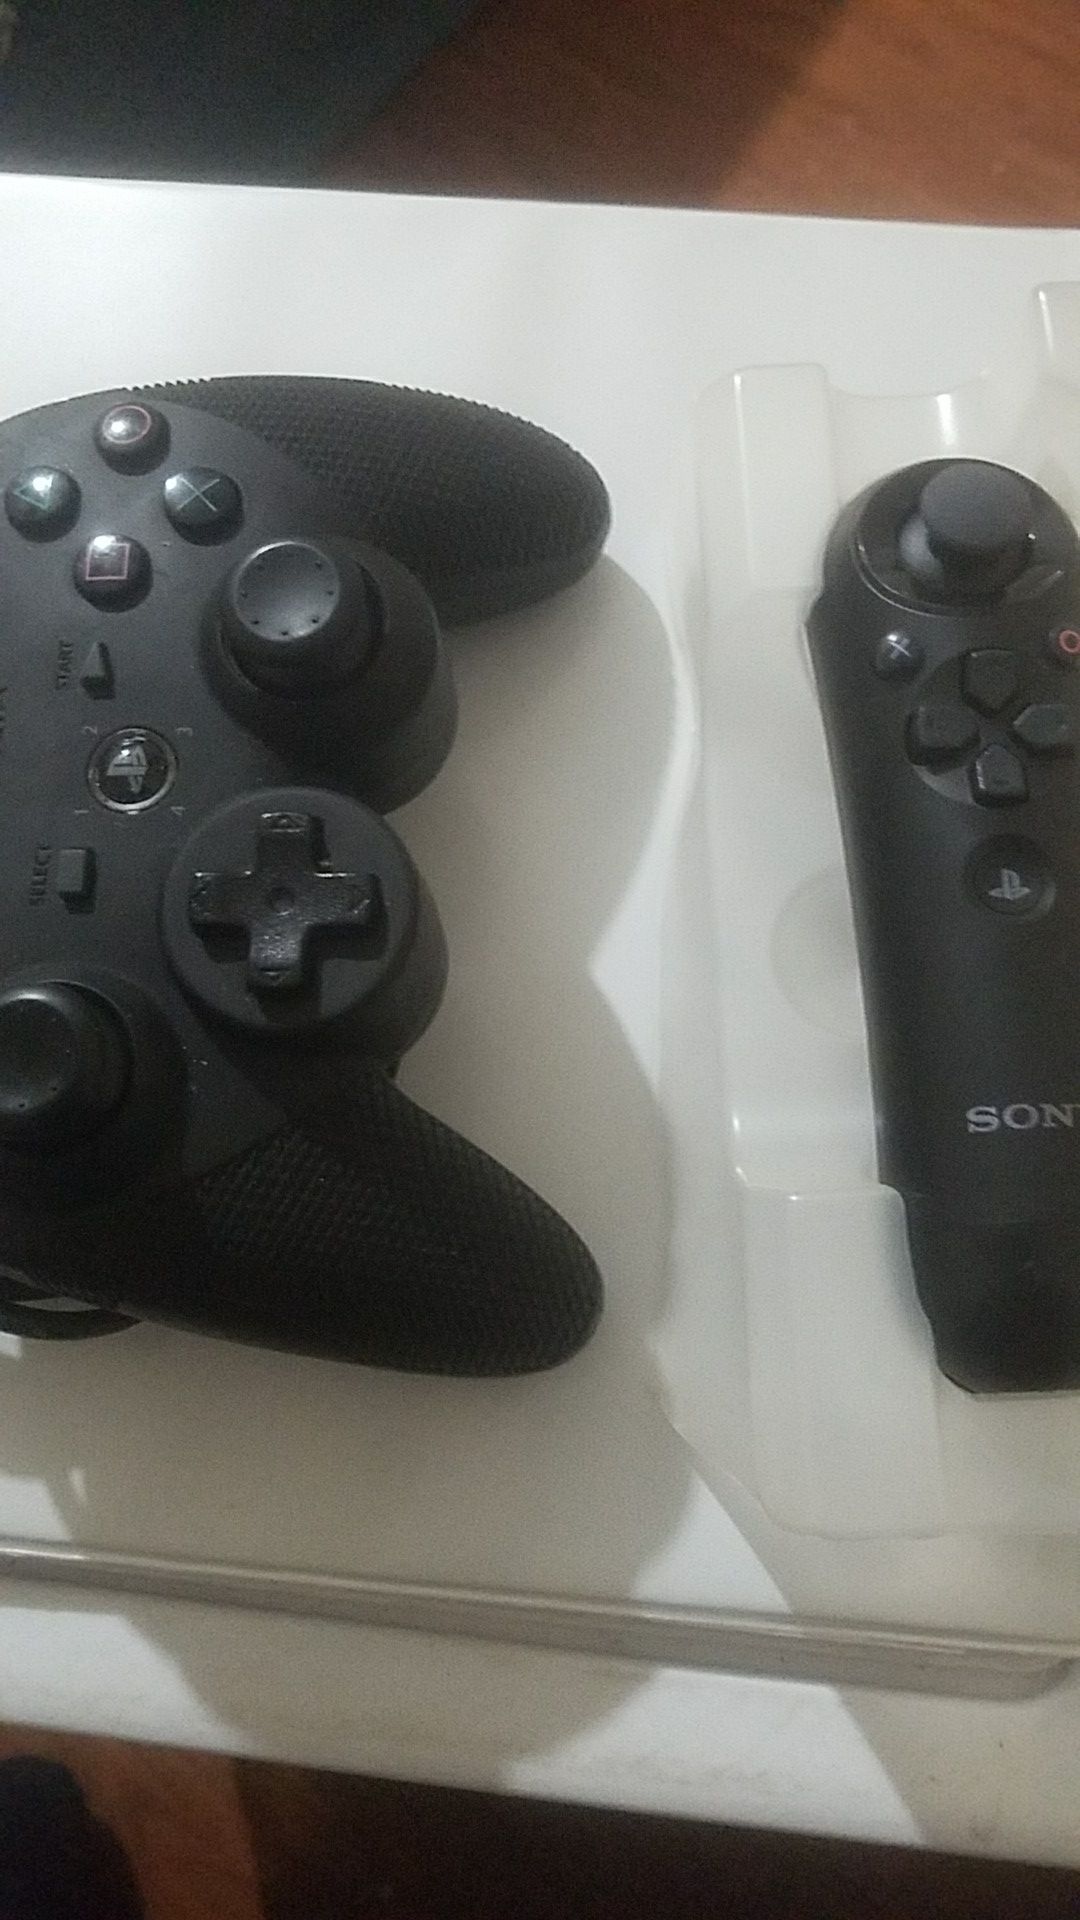 Ps3 controller and ps3/4 move controller